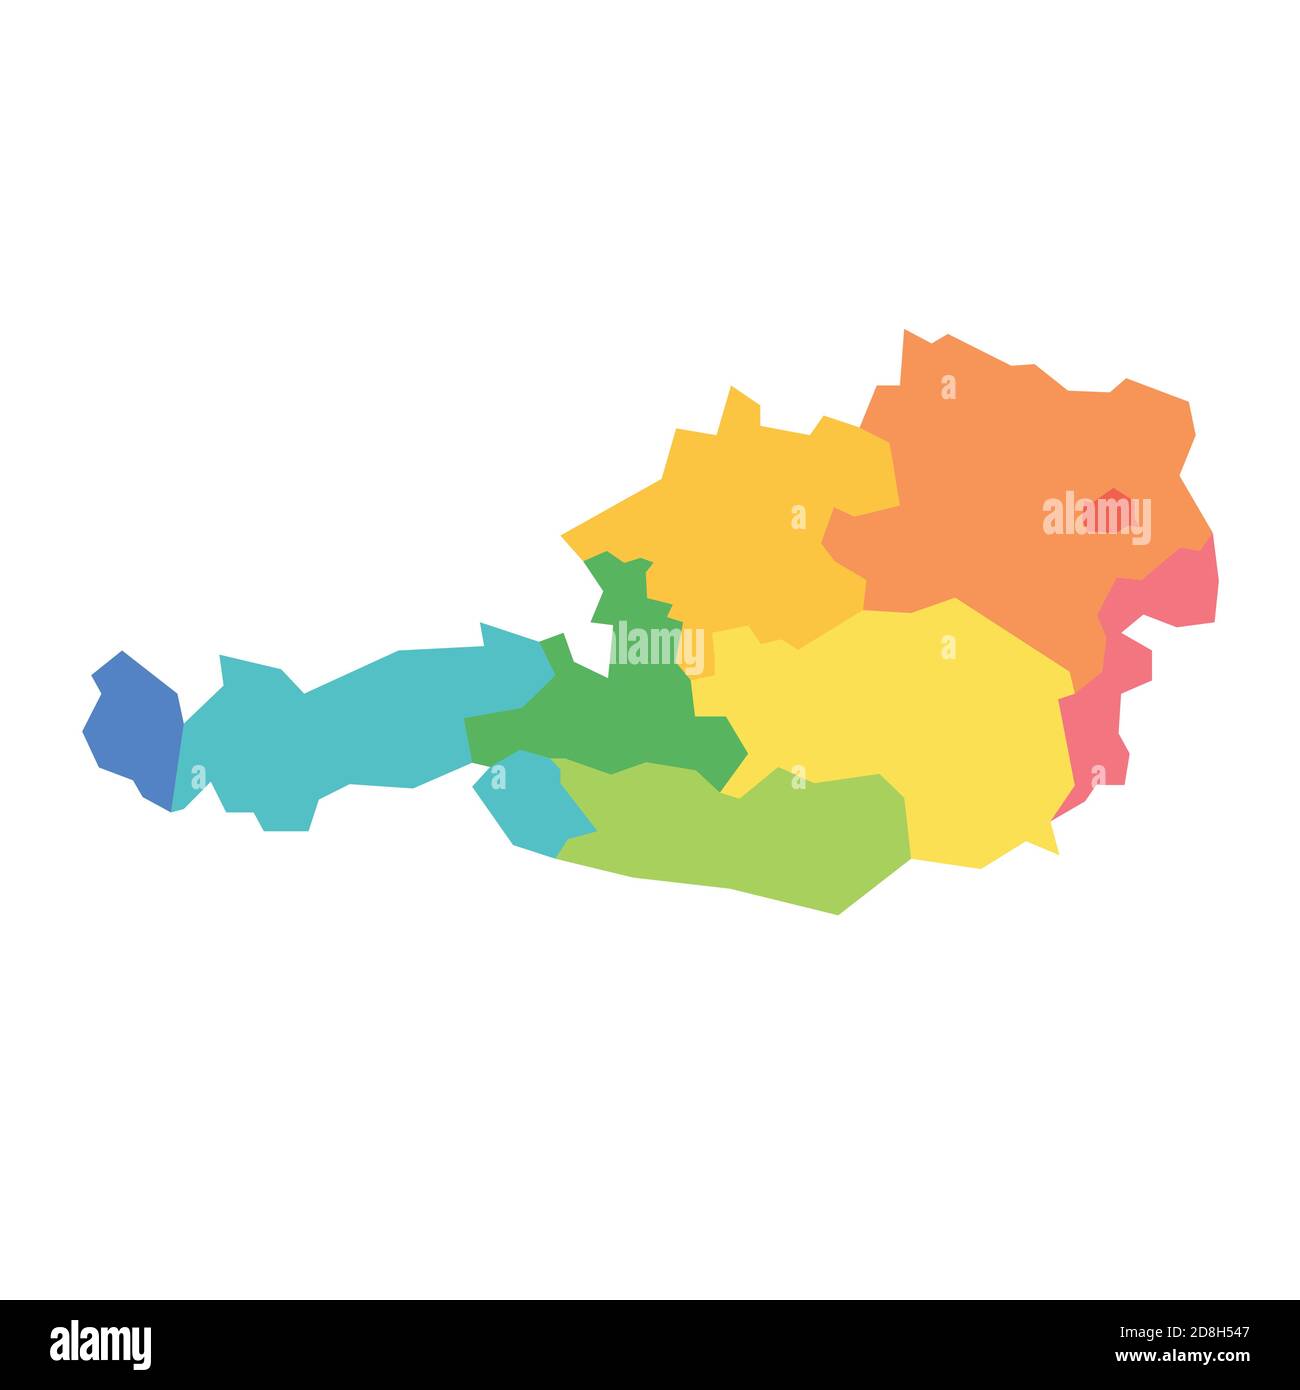 States of Austria. Map of regional country administrative divisions. Colorful vector illustration. Stock Vector